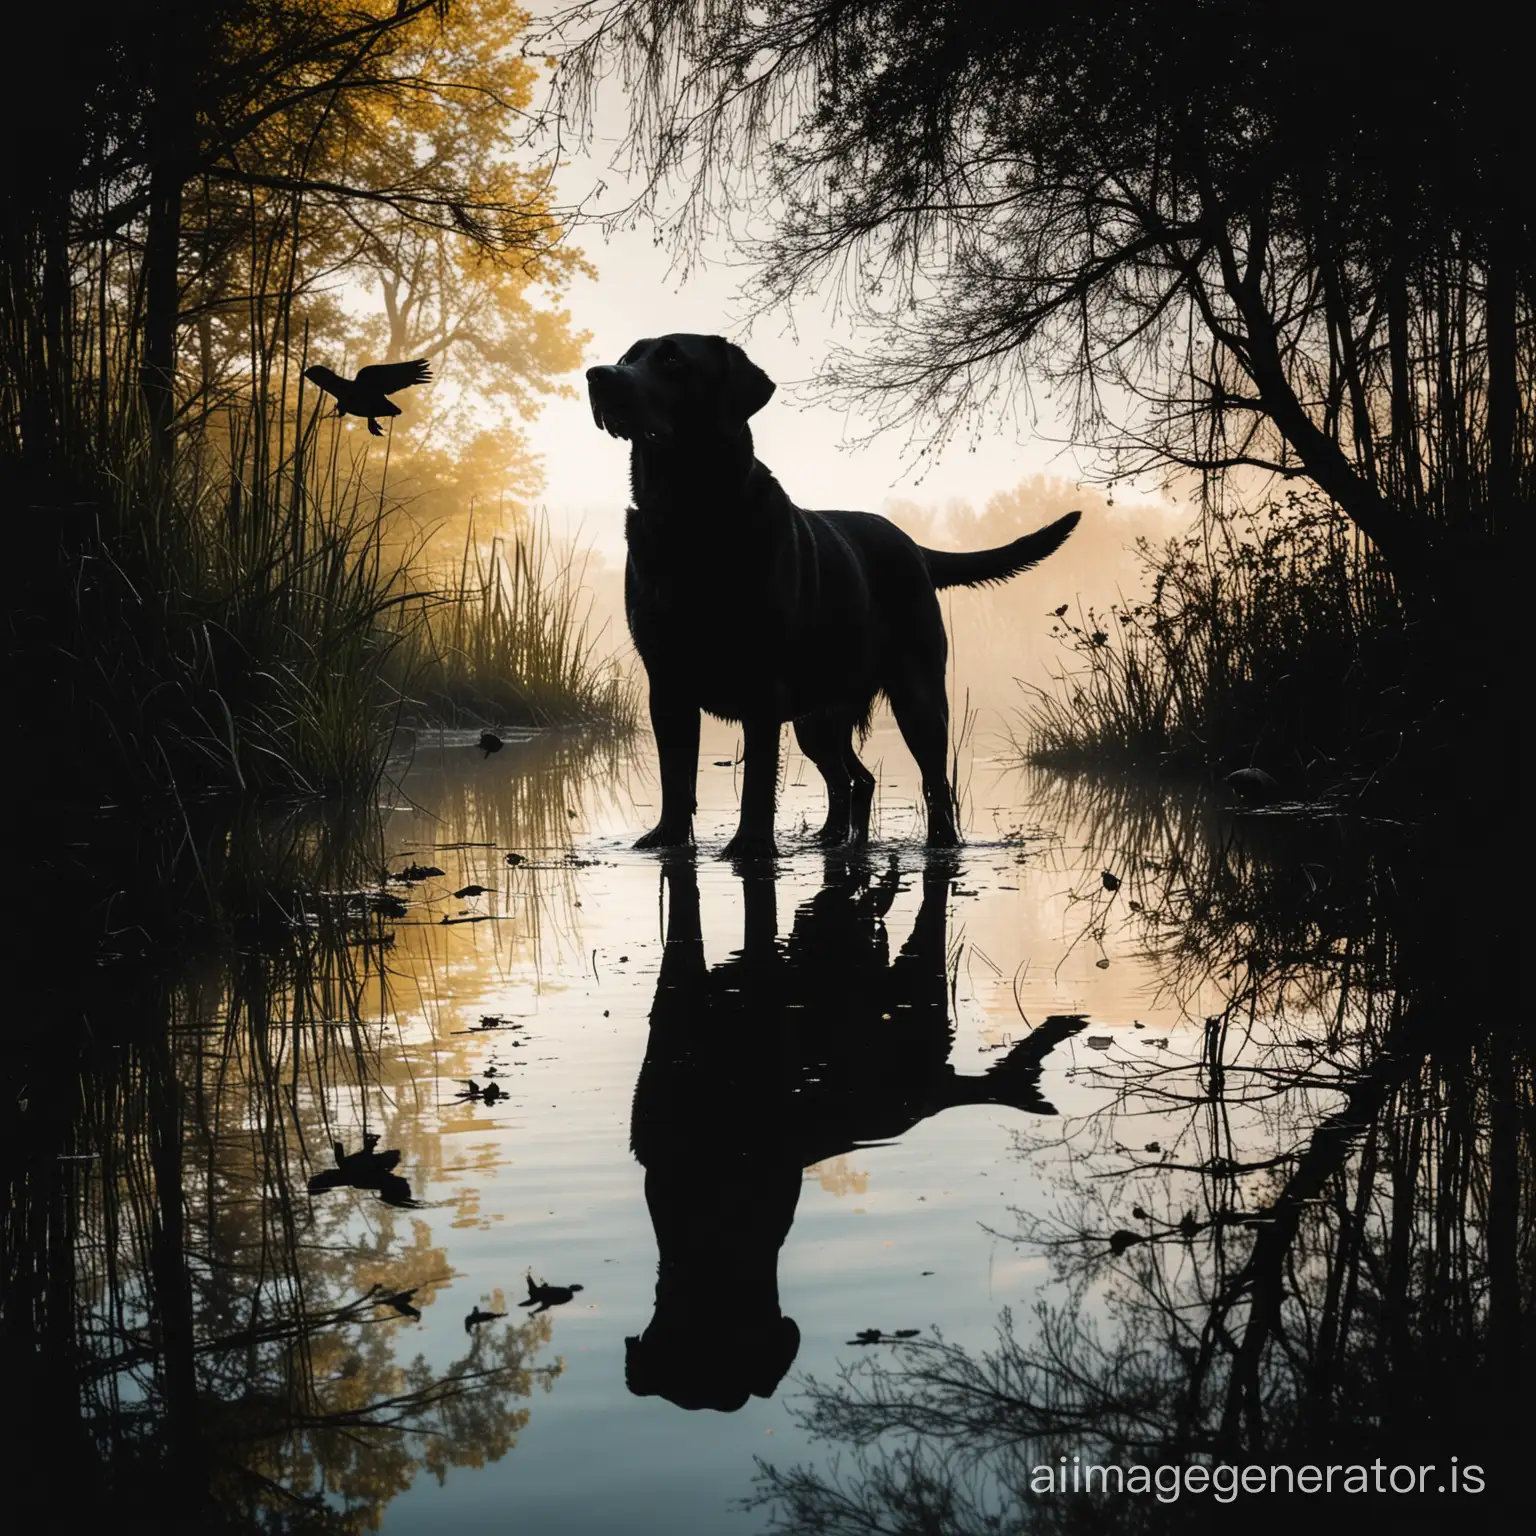 Labrador-Silhouette-with-Pond-and-Ducks-Double-Exposure-Art